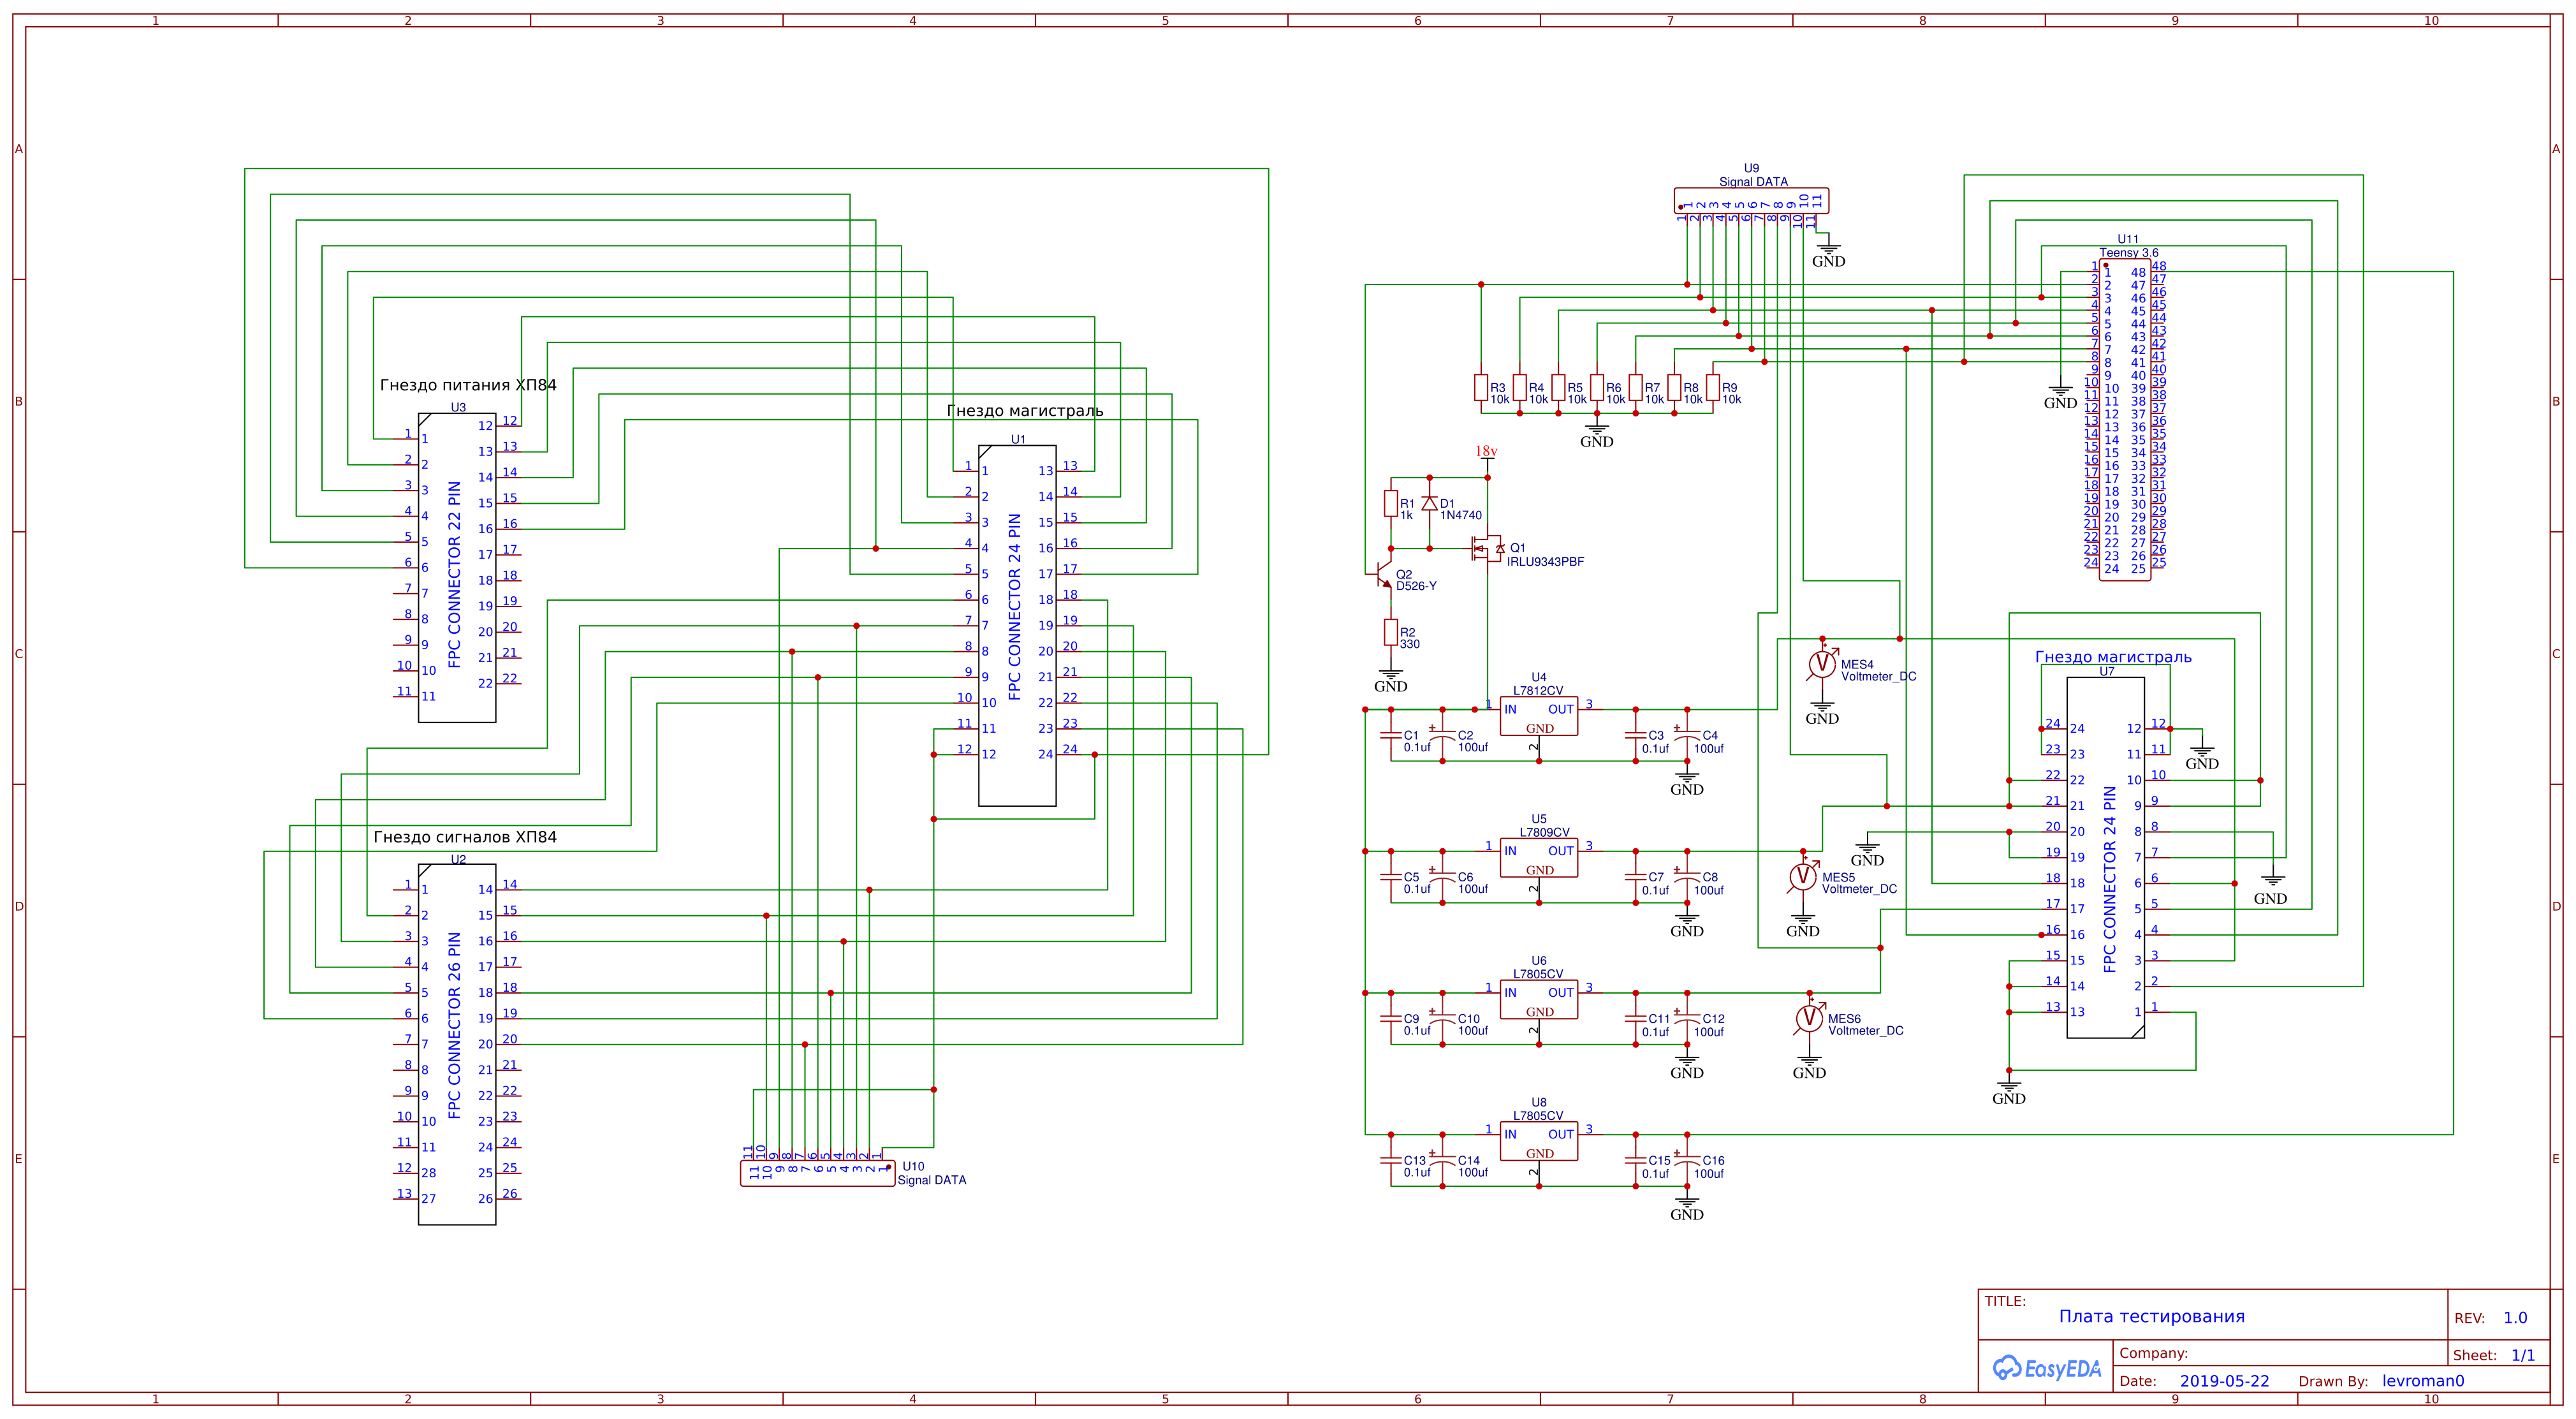 Schematic_84_Sheet-1_20190829135837.png